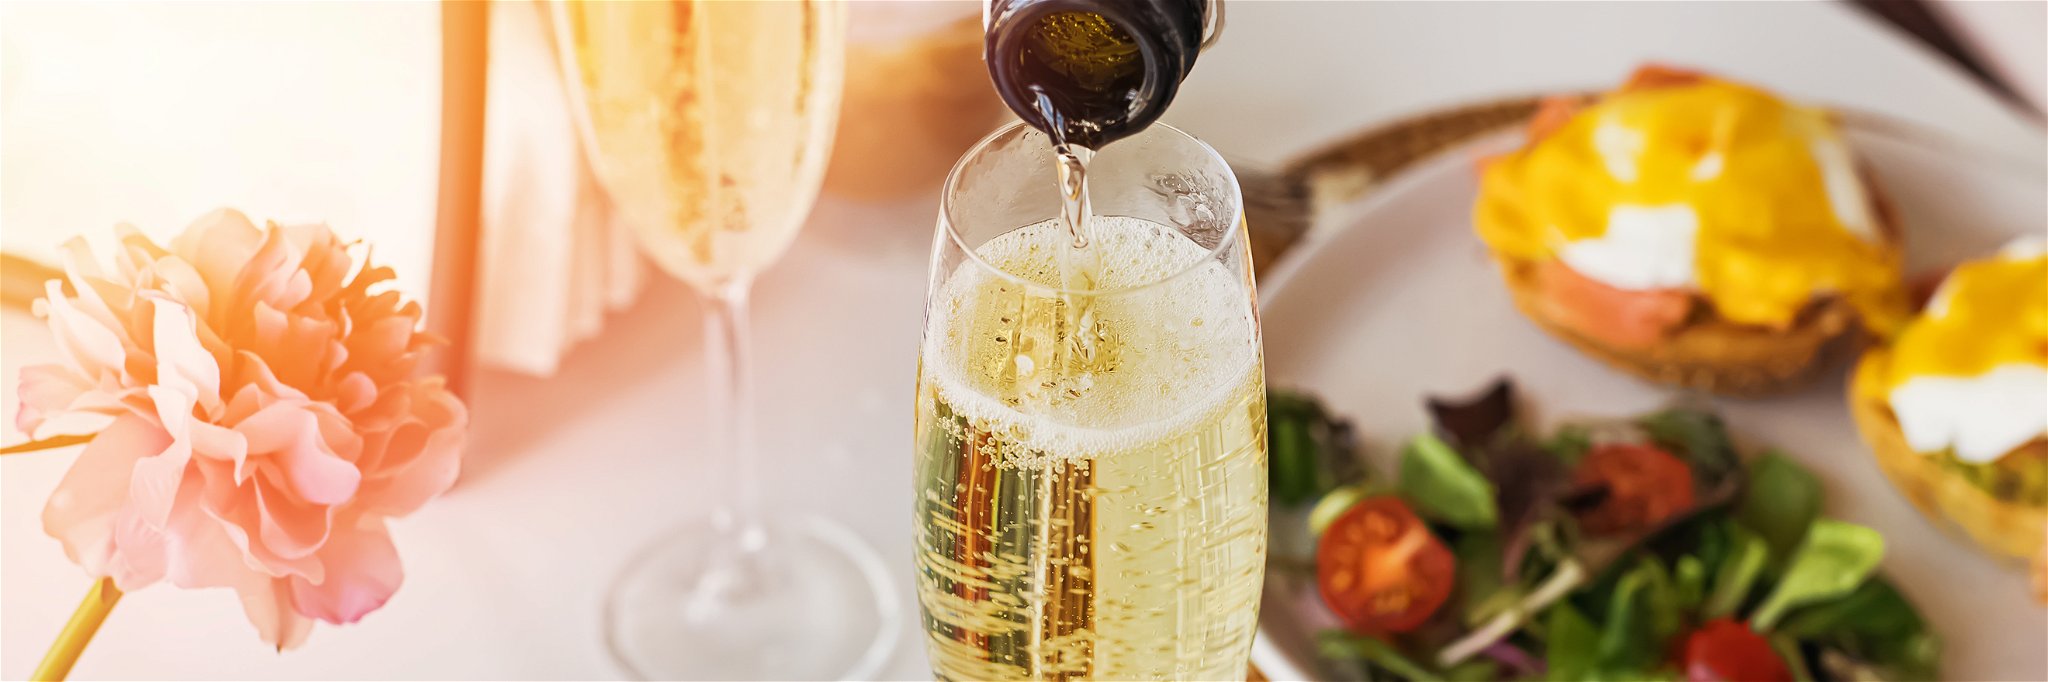 Prosecco is the world's best-selling sparkling wine&nbsp;